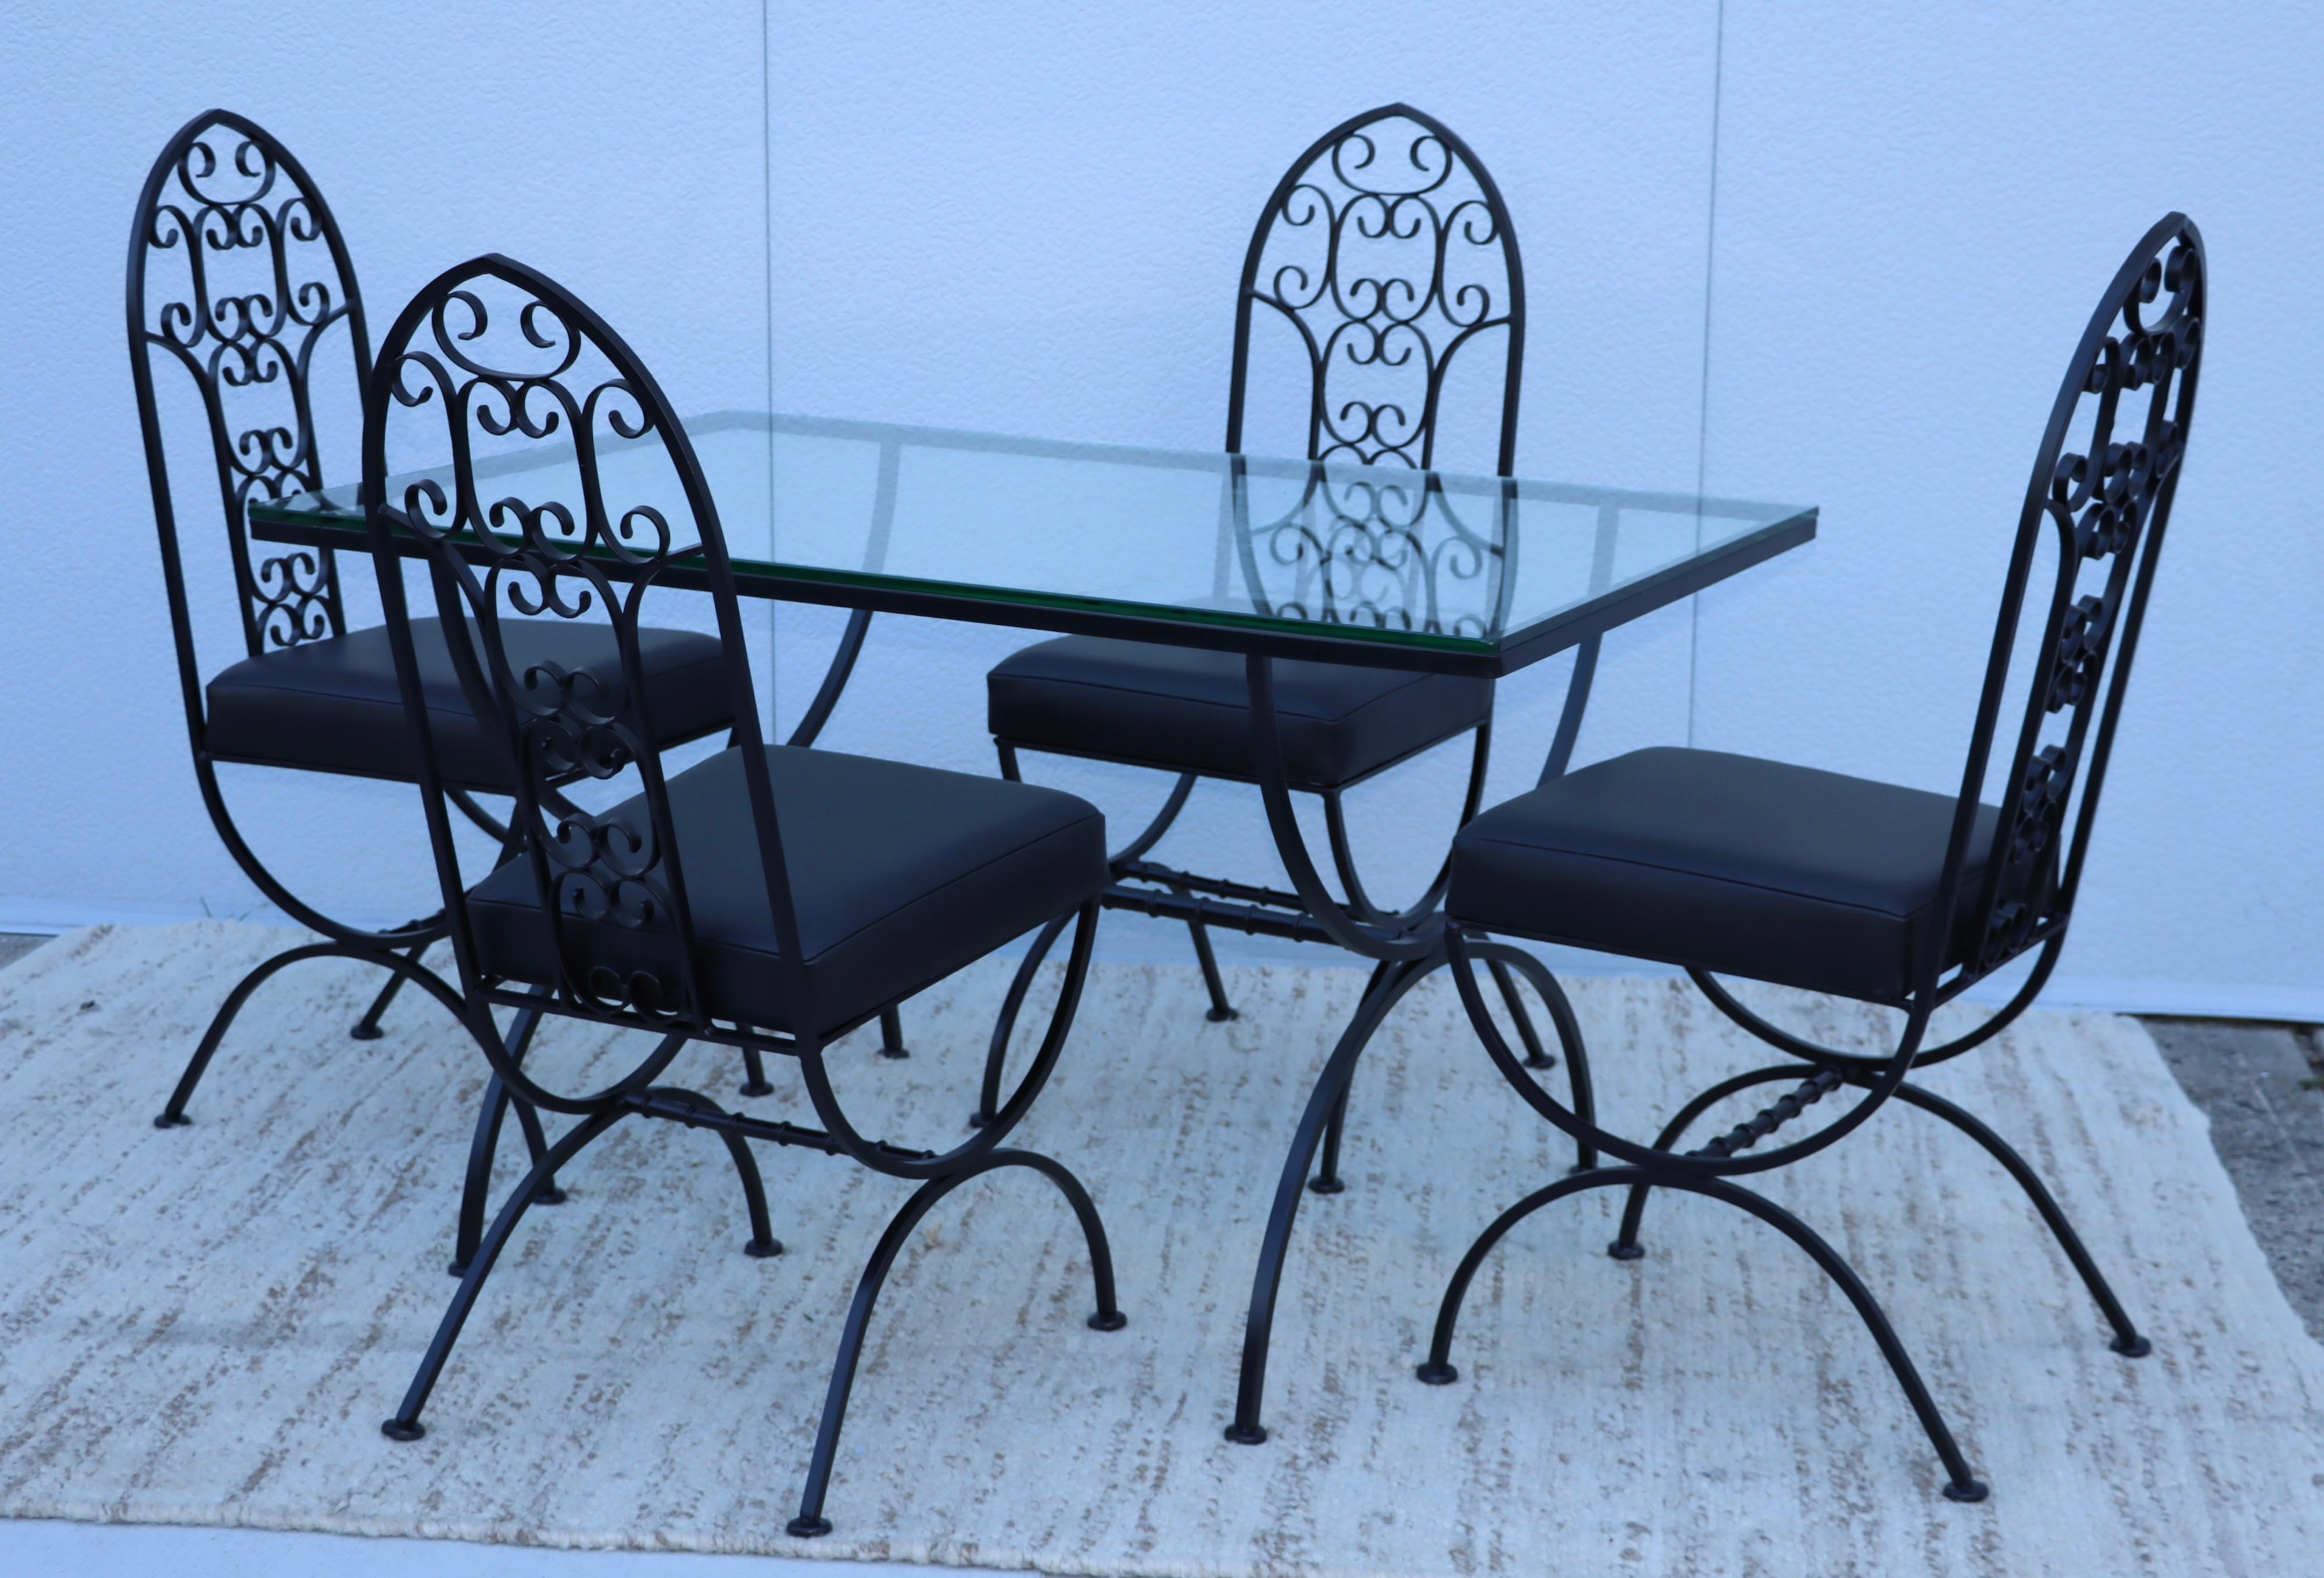 1950's Mid-Century Modern wrought iron dining set by John Salterini, newly painted with new glass top and new leather upholstery seats.